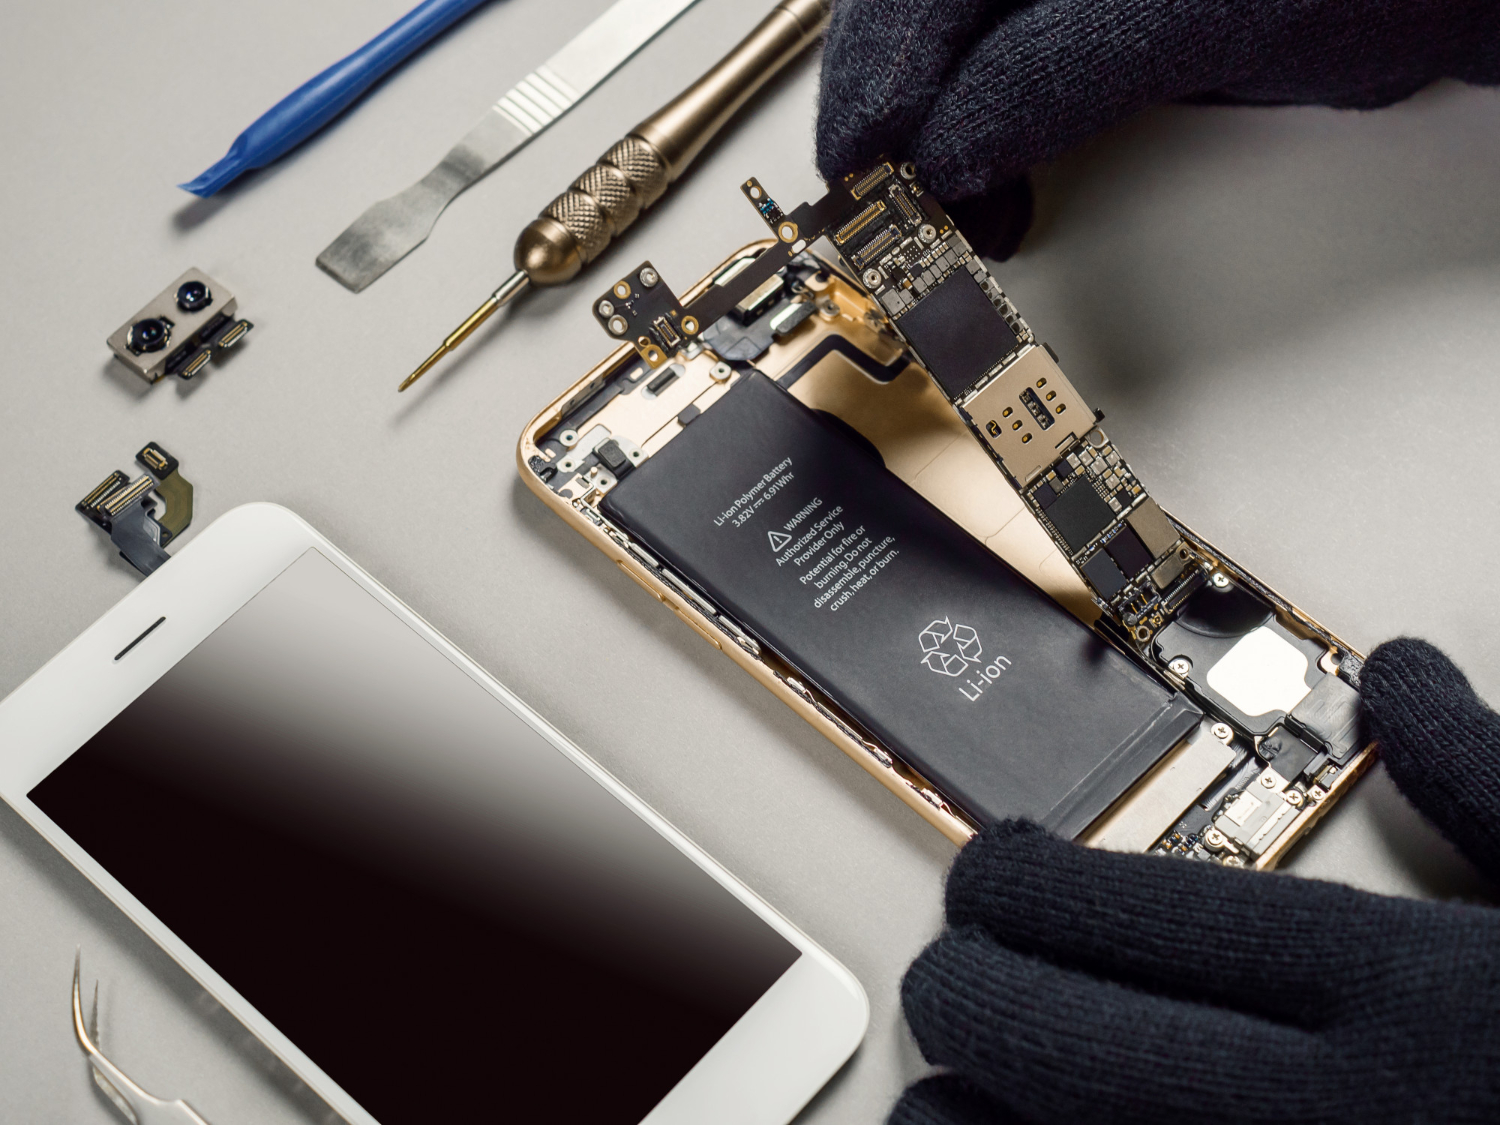 Repairing your old Cell Phone Easily